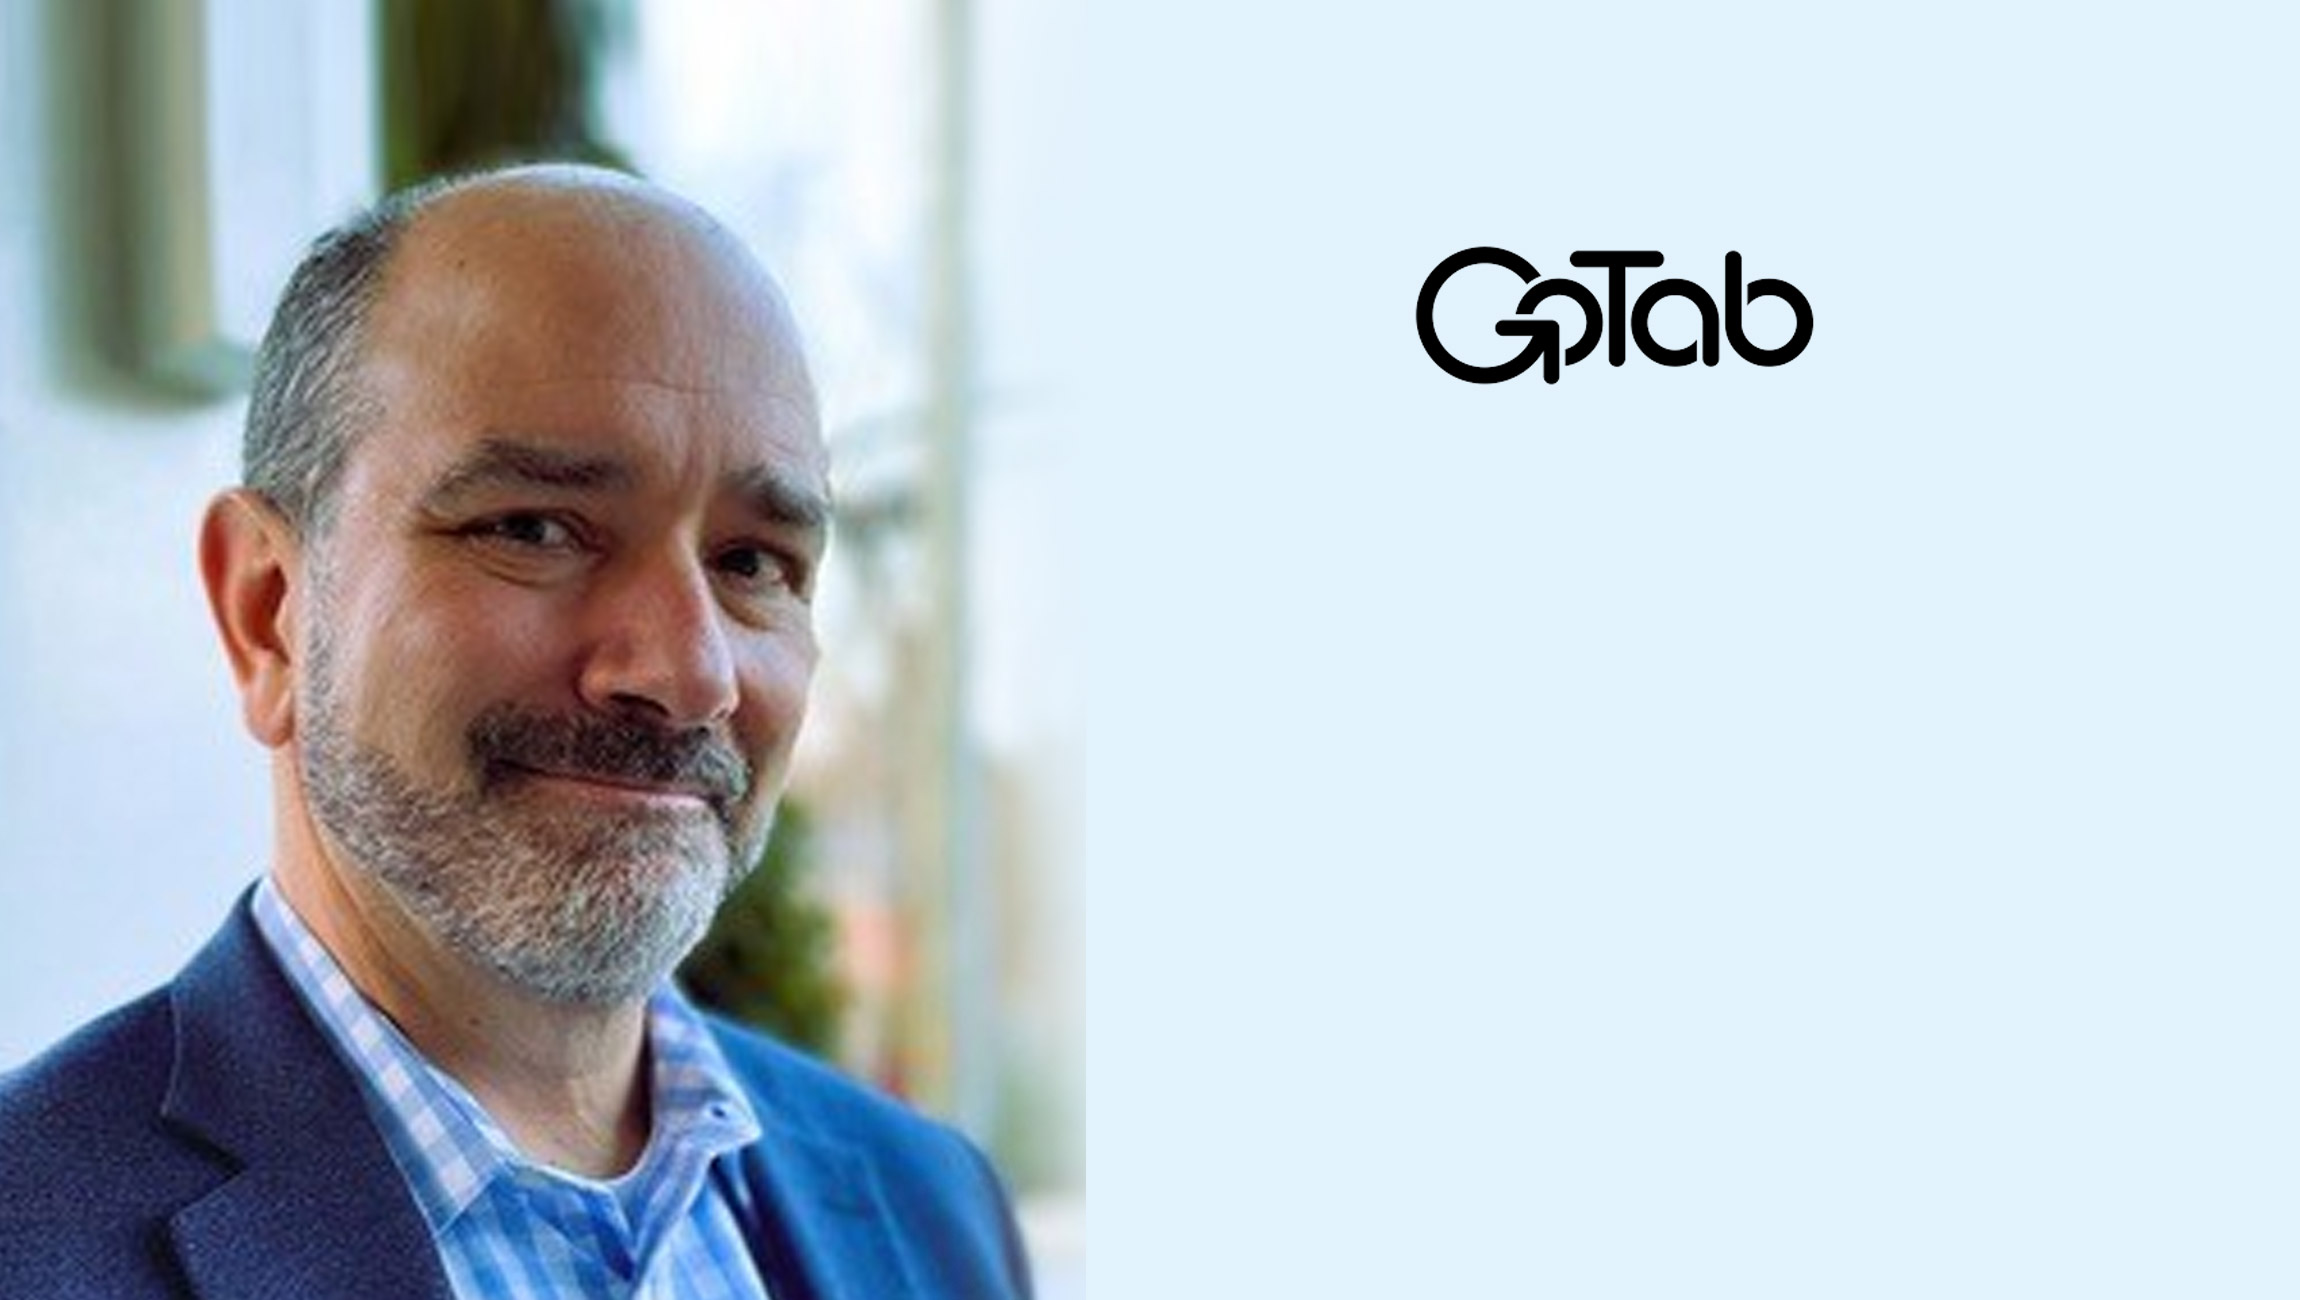 GoTab Appoints Mike Dunn as Chief Financial Officer